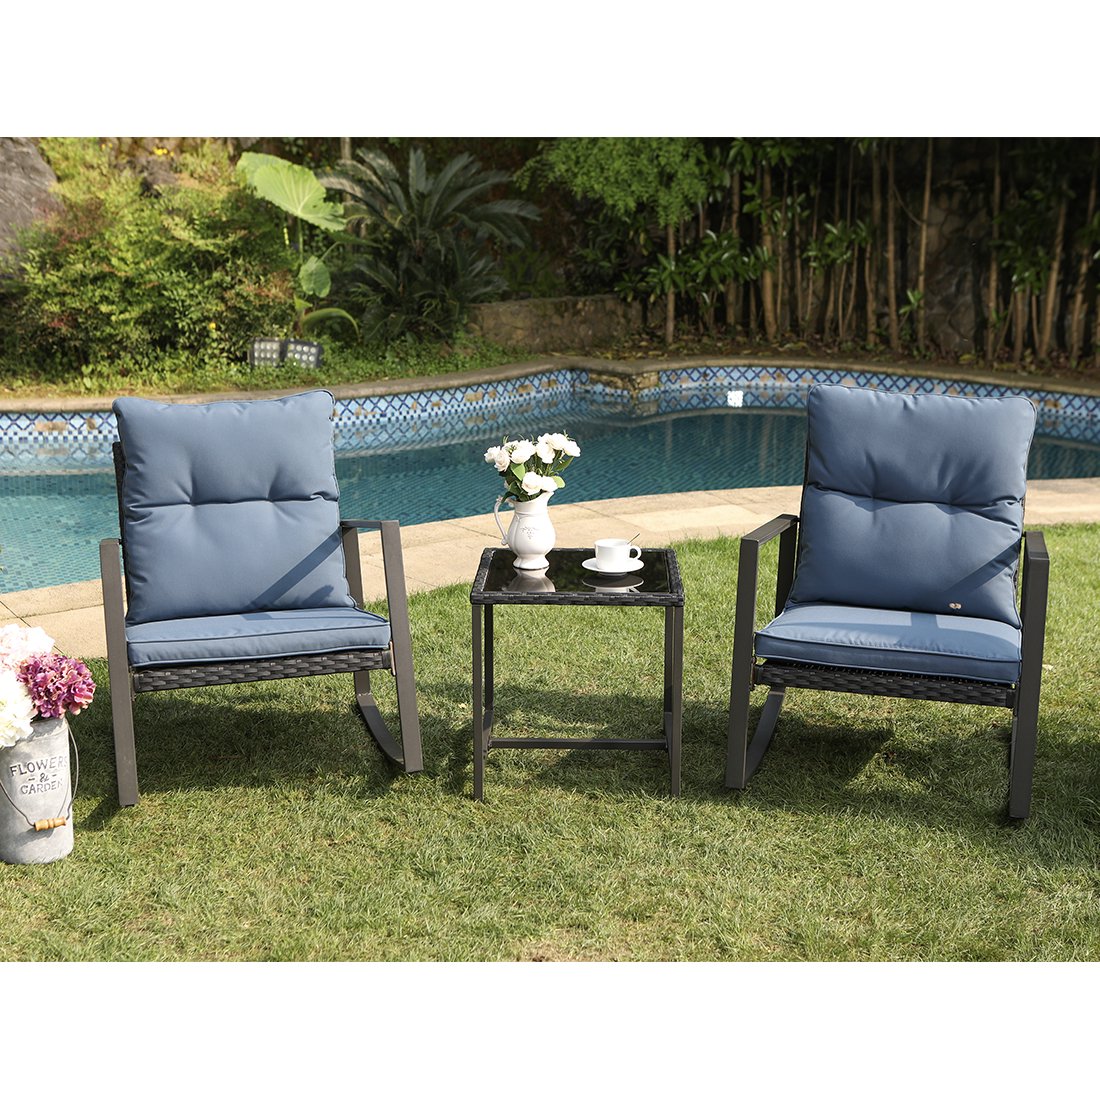 COSIEST Outdoor Bistro Rocking Chair Set with Blue Cushions, Steel Frame and Wicker Seat Base, Tempered Glass Top Coffee Table - image 1 of 13